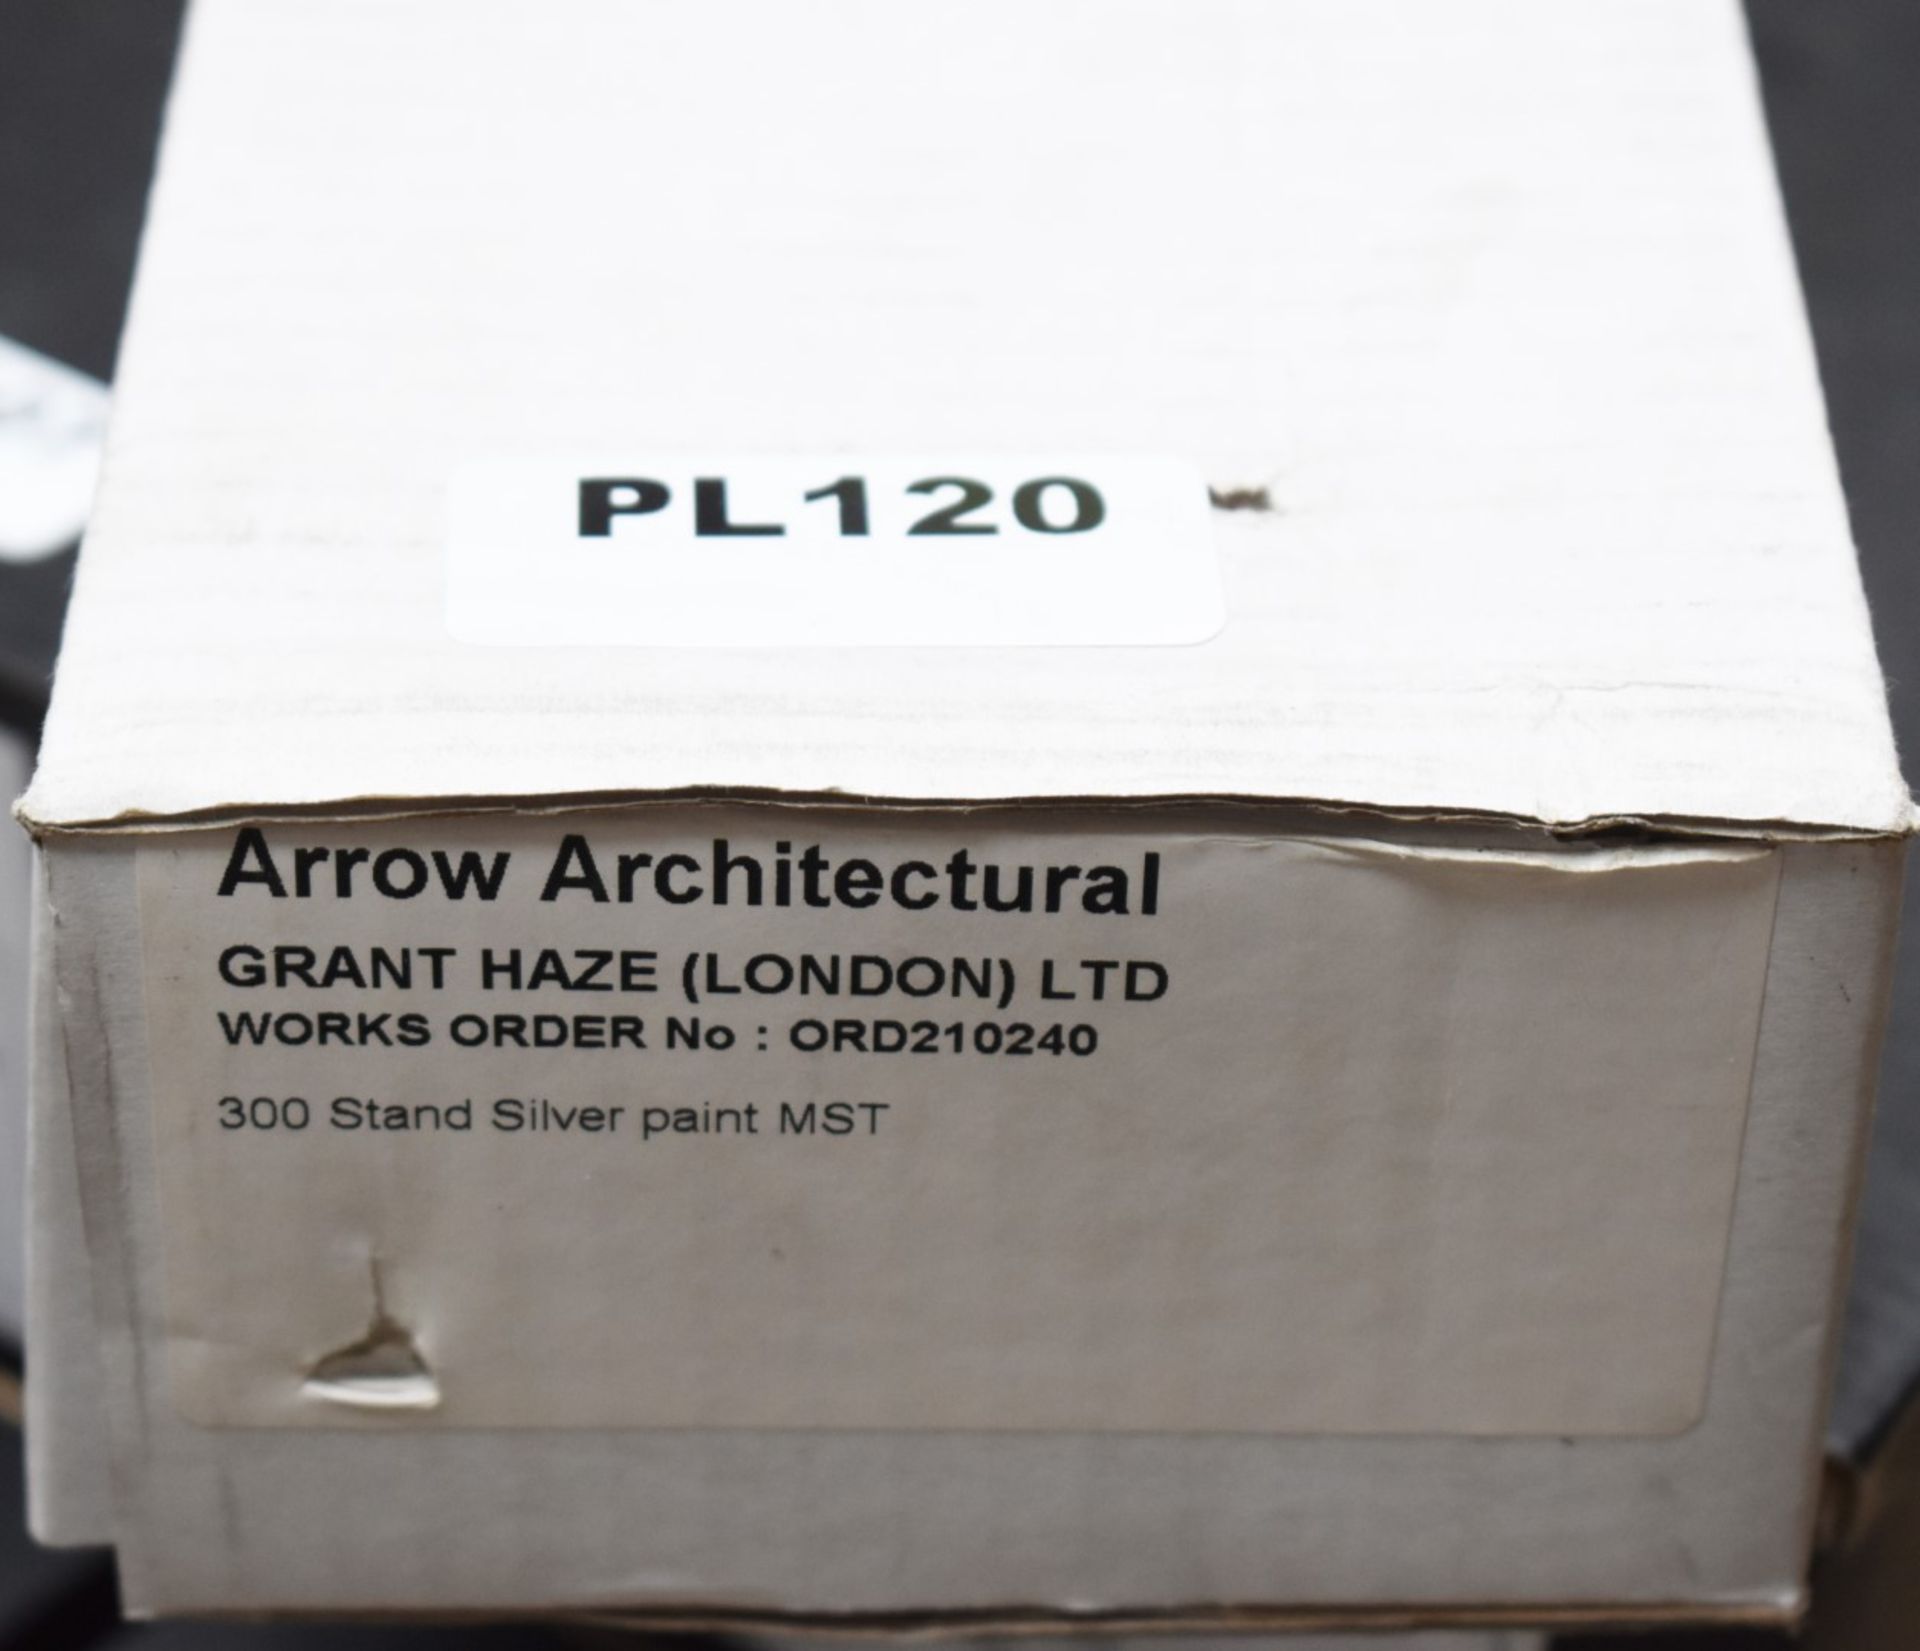 1 x Arrow Architectural Soft Door Closure - 300 Stand Silver Paint MST - Brand New Stock - Product - Image 2 of 2